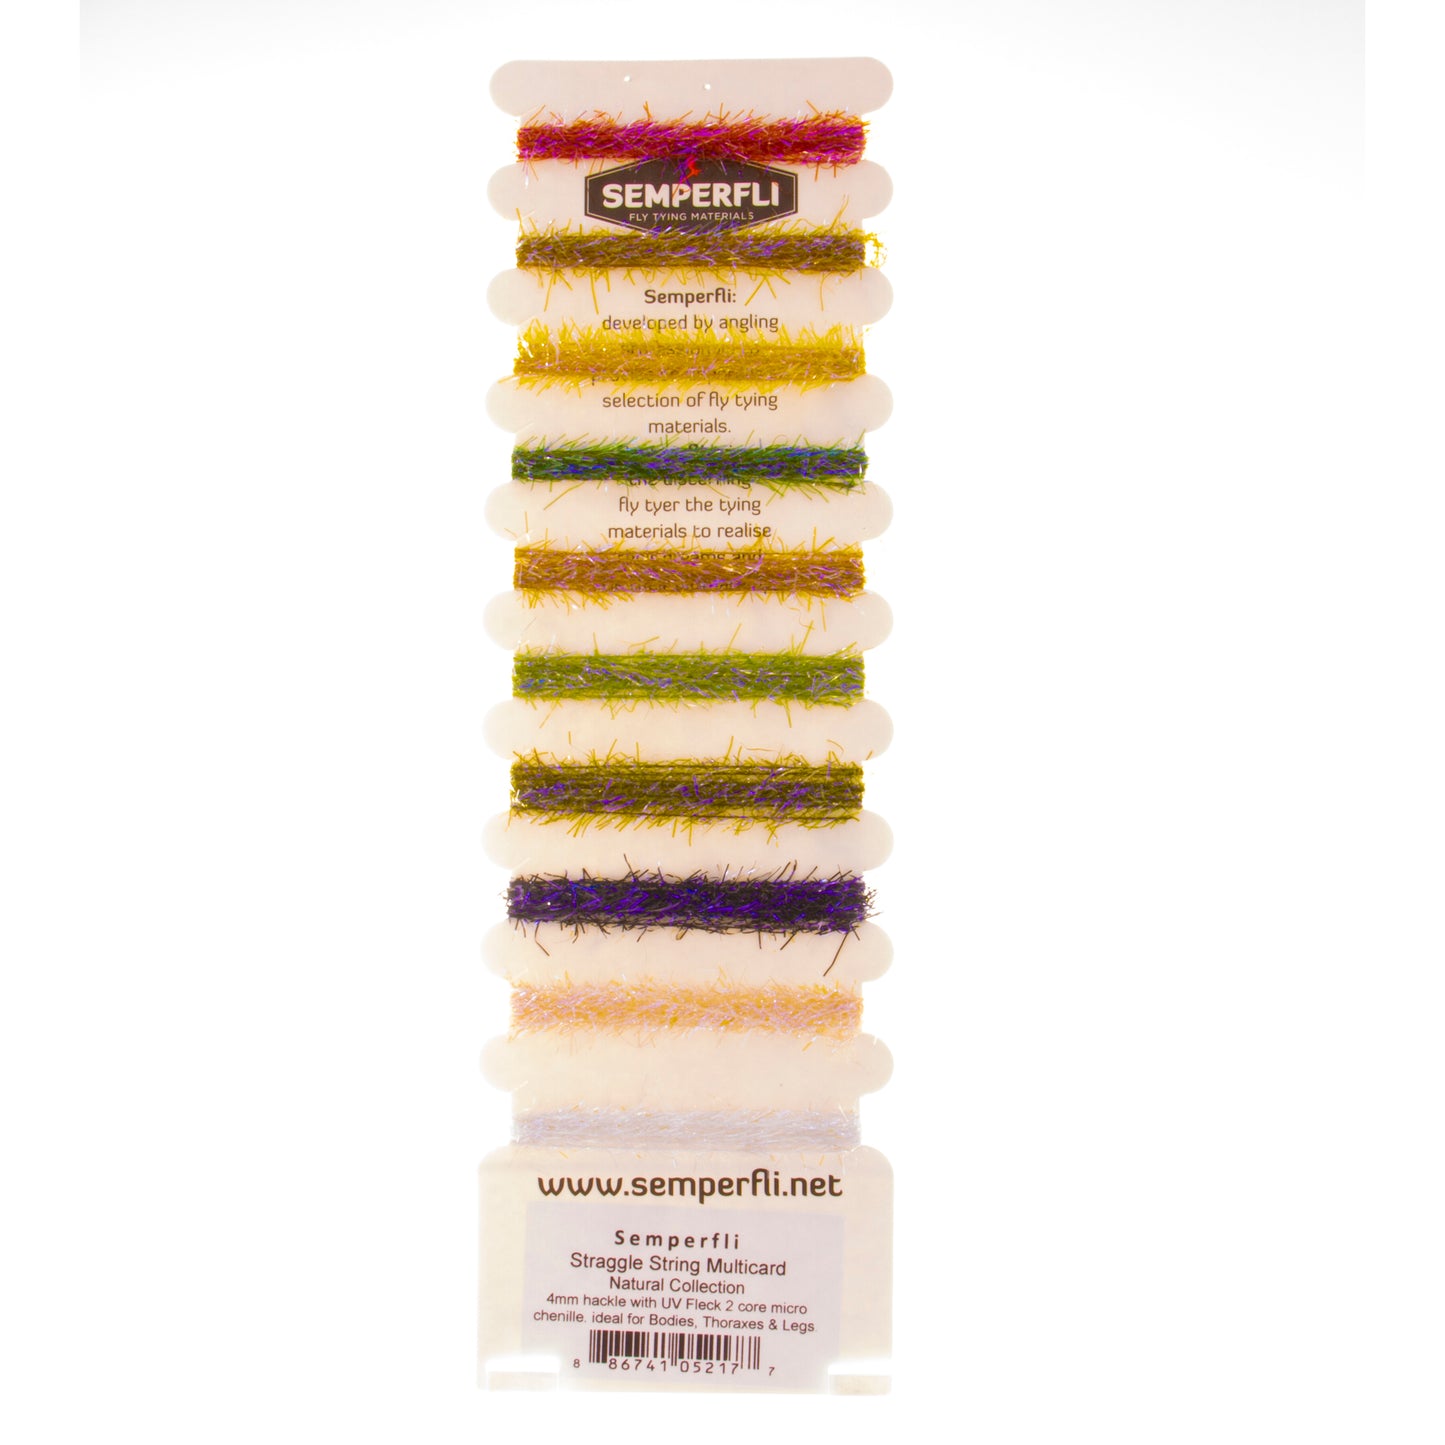 SemperFli Straggle String Multi Card Pack Naturals Collection